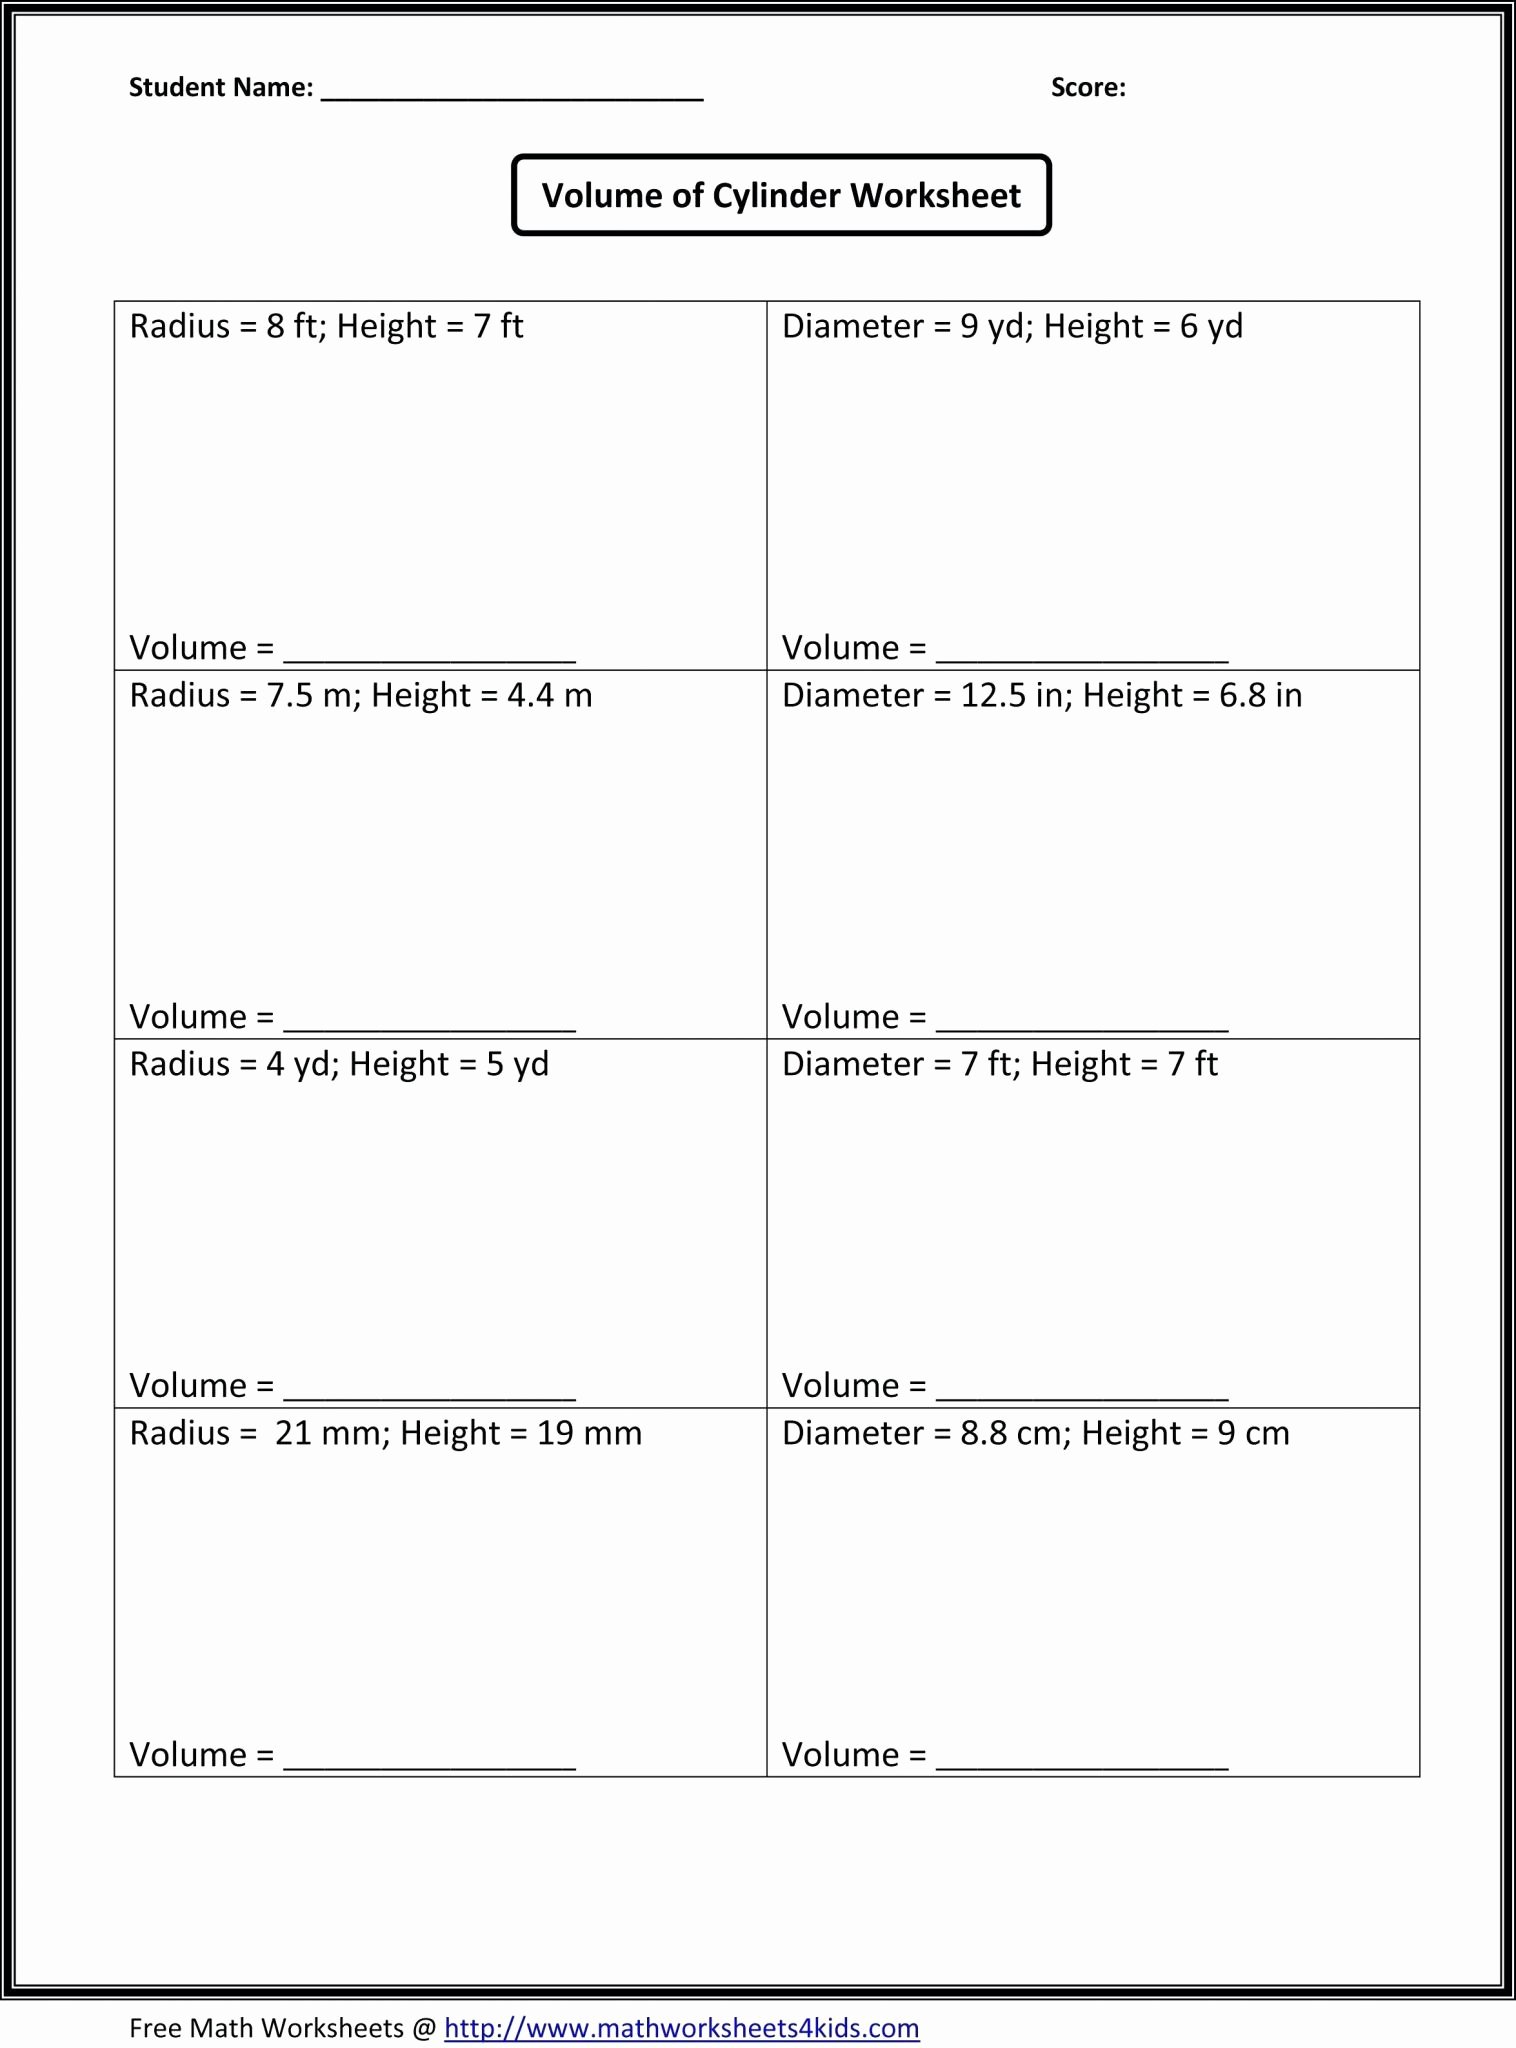 Transcription and Translation Practice Worksheet Luxury Transcription and Translation Practice Worksheet Answer